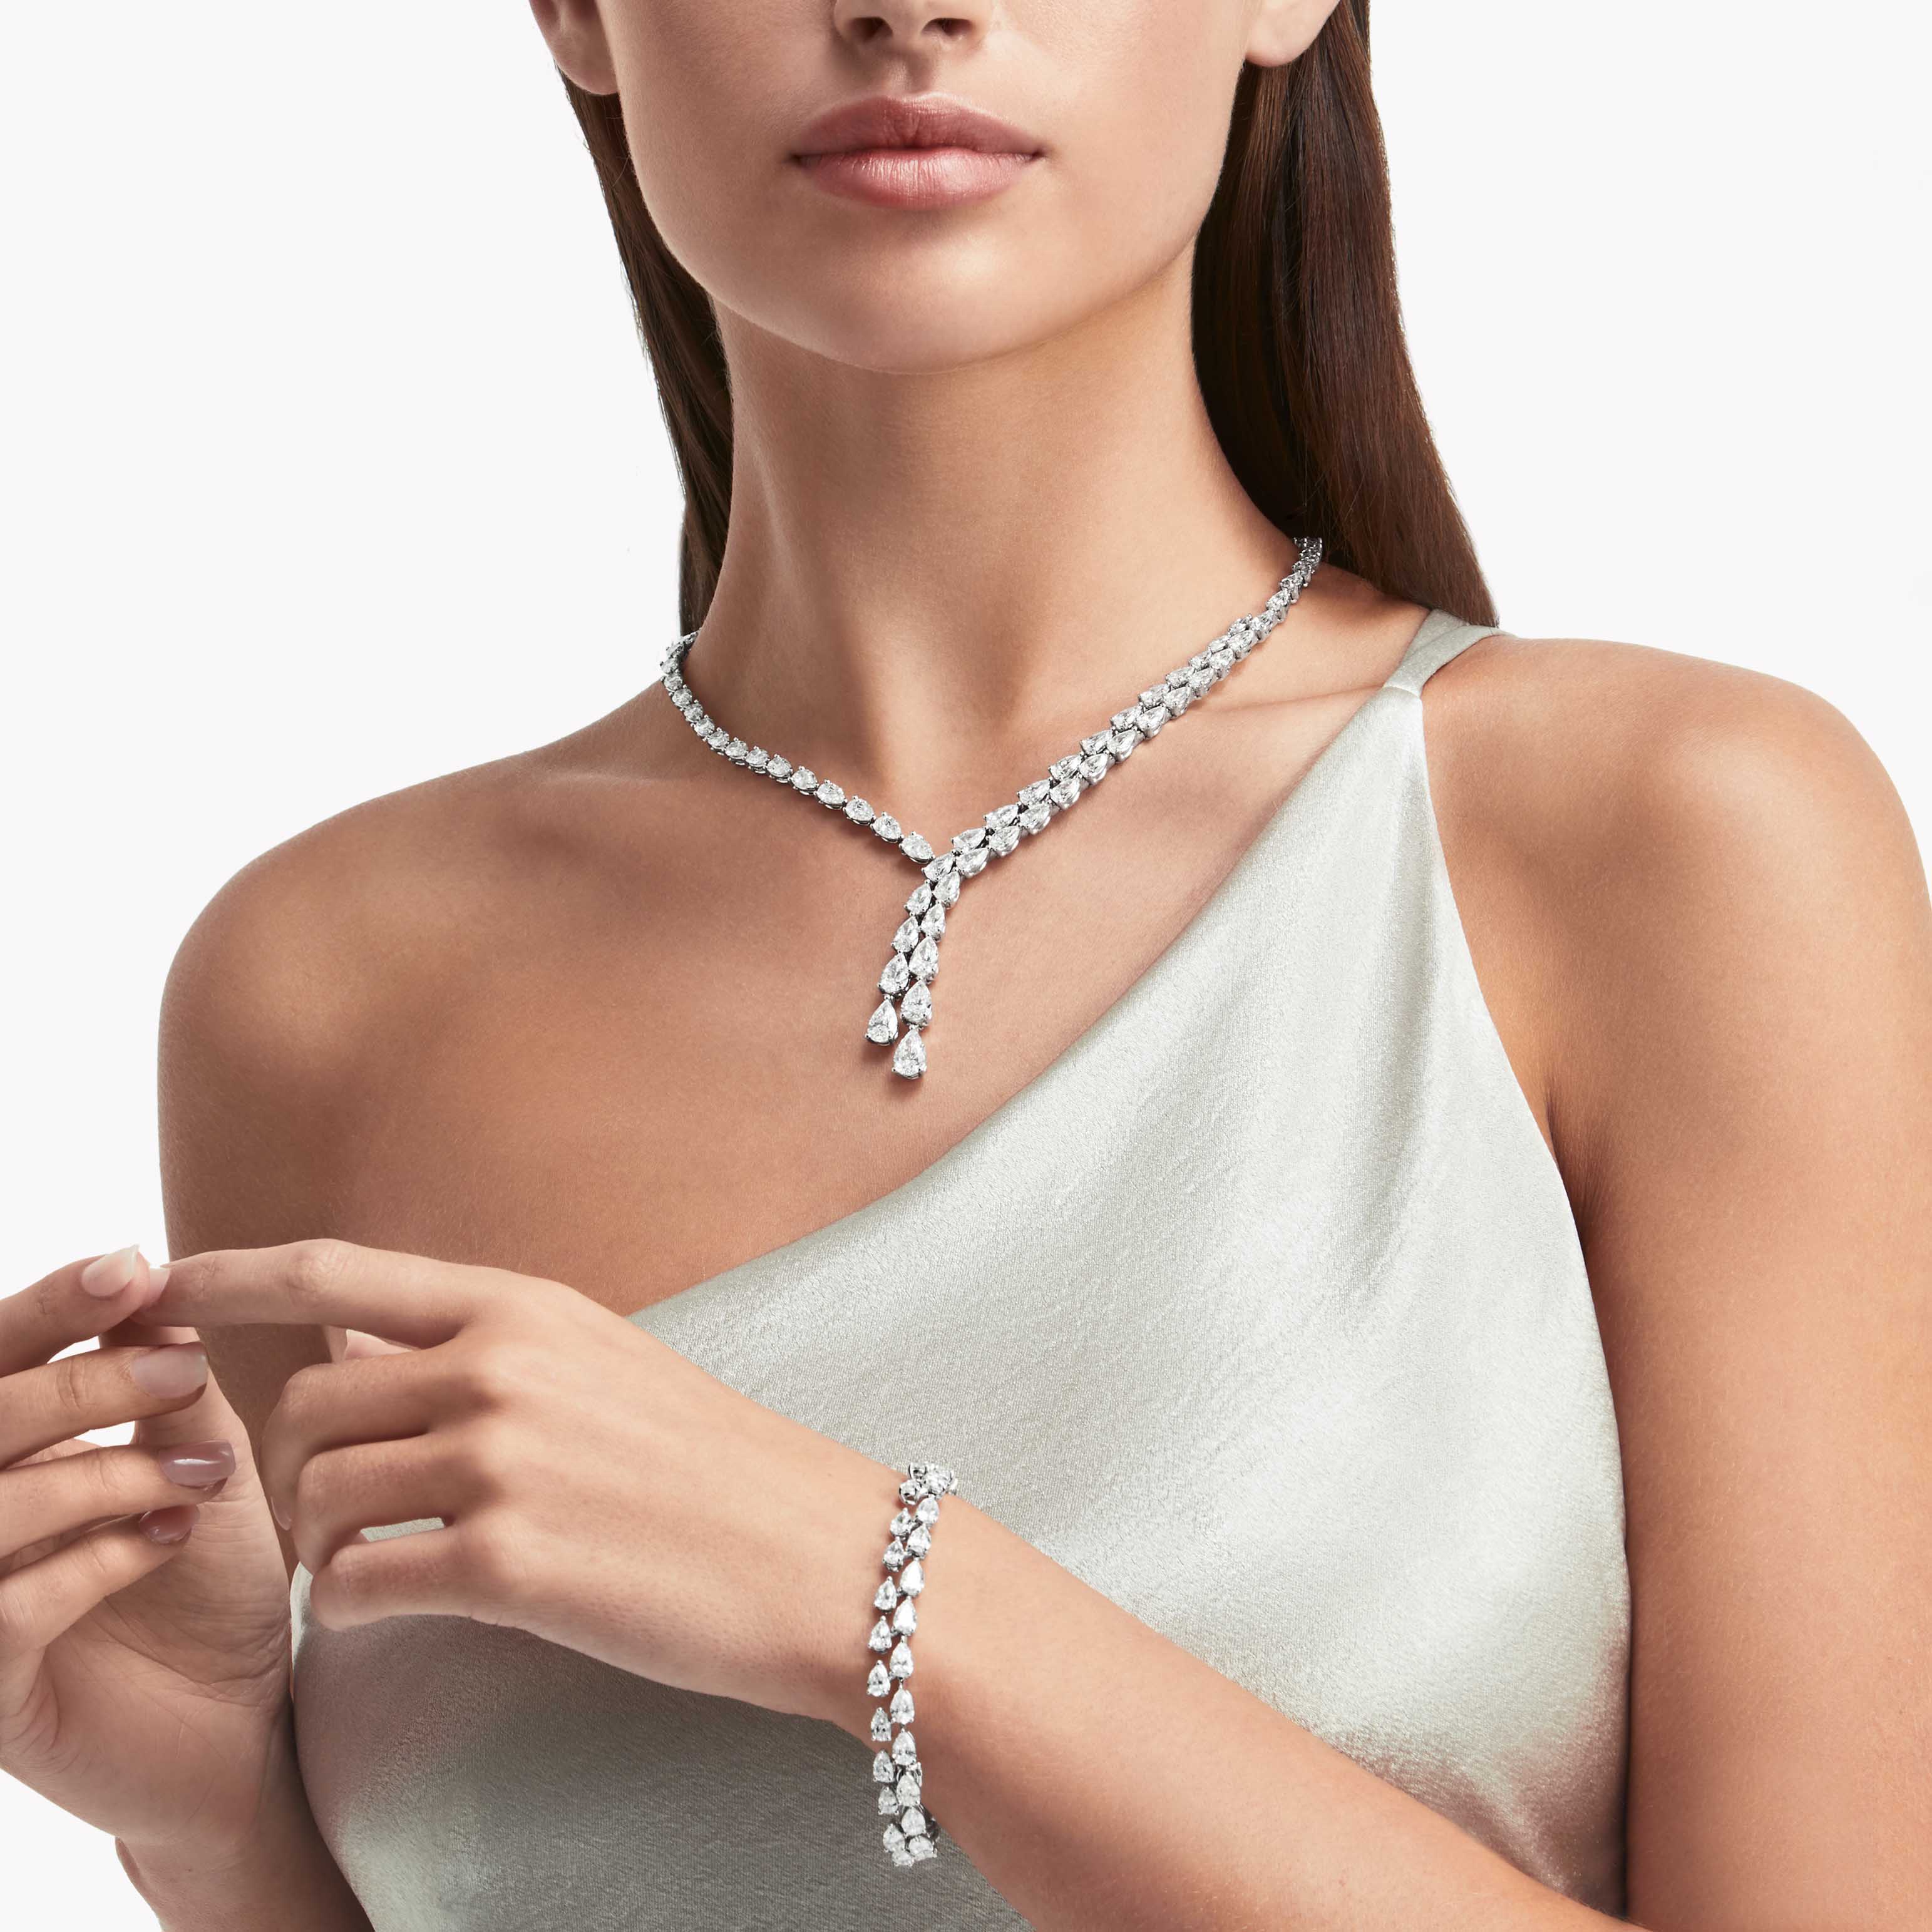 Model wearing Graff Pear Shape Diamond Cross-over Necklace PLATINUM AND WHITE GOLD and Graff Pear Shape Diamond Bracelet WHITE GOLD